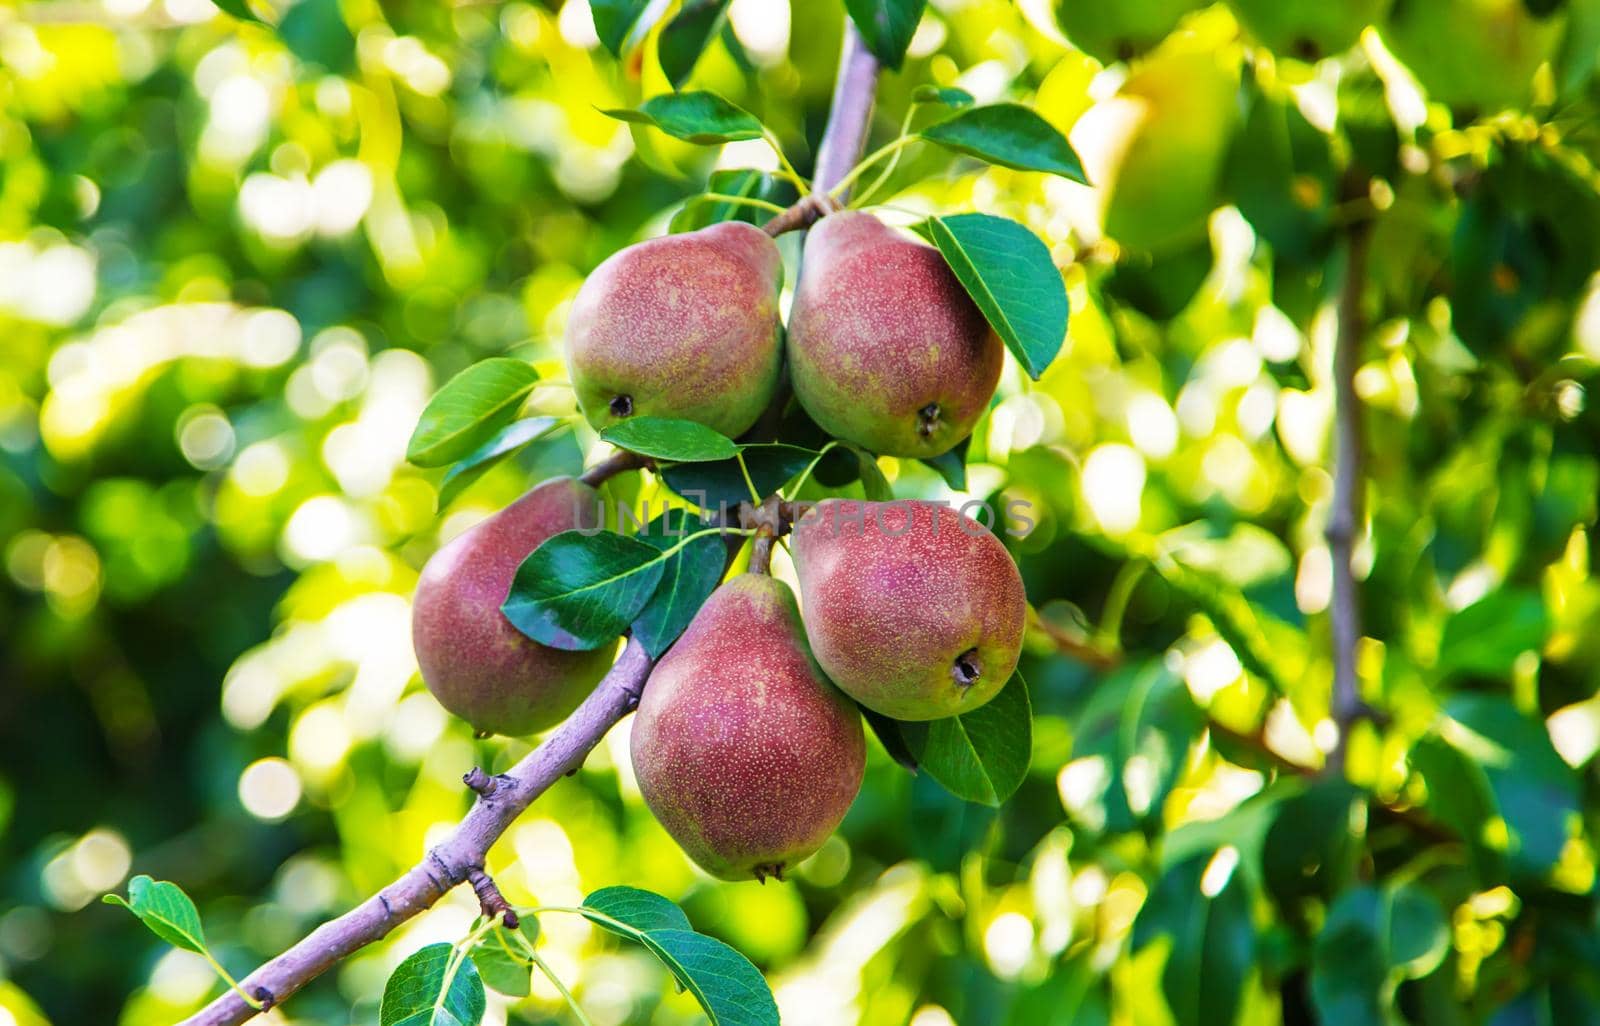 pears growing on a pear tree. pear garden selective focus.nature